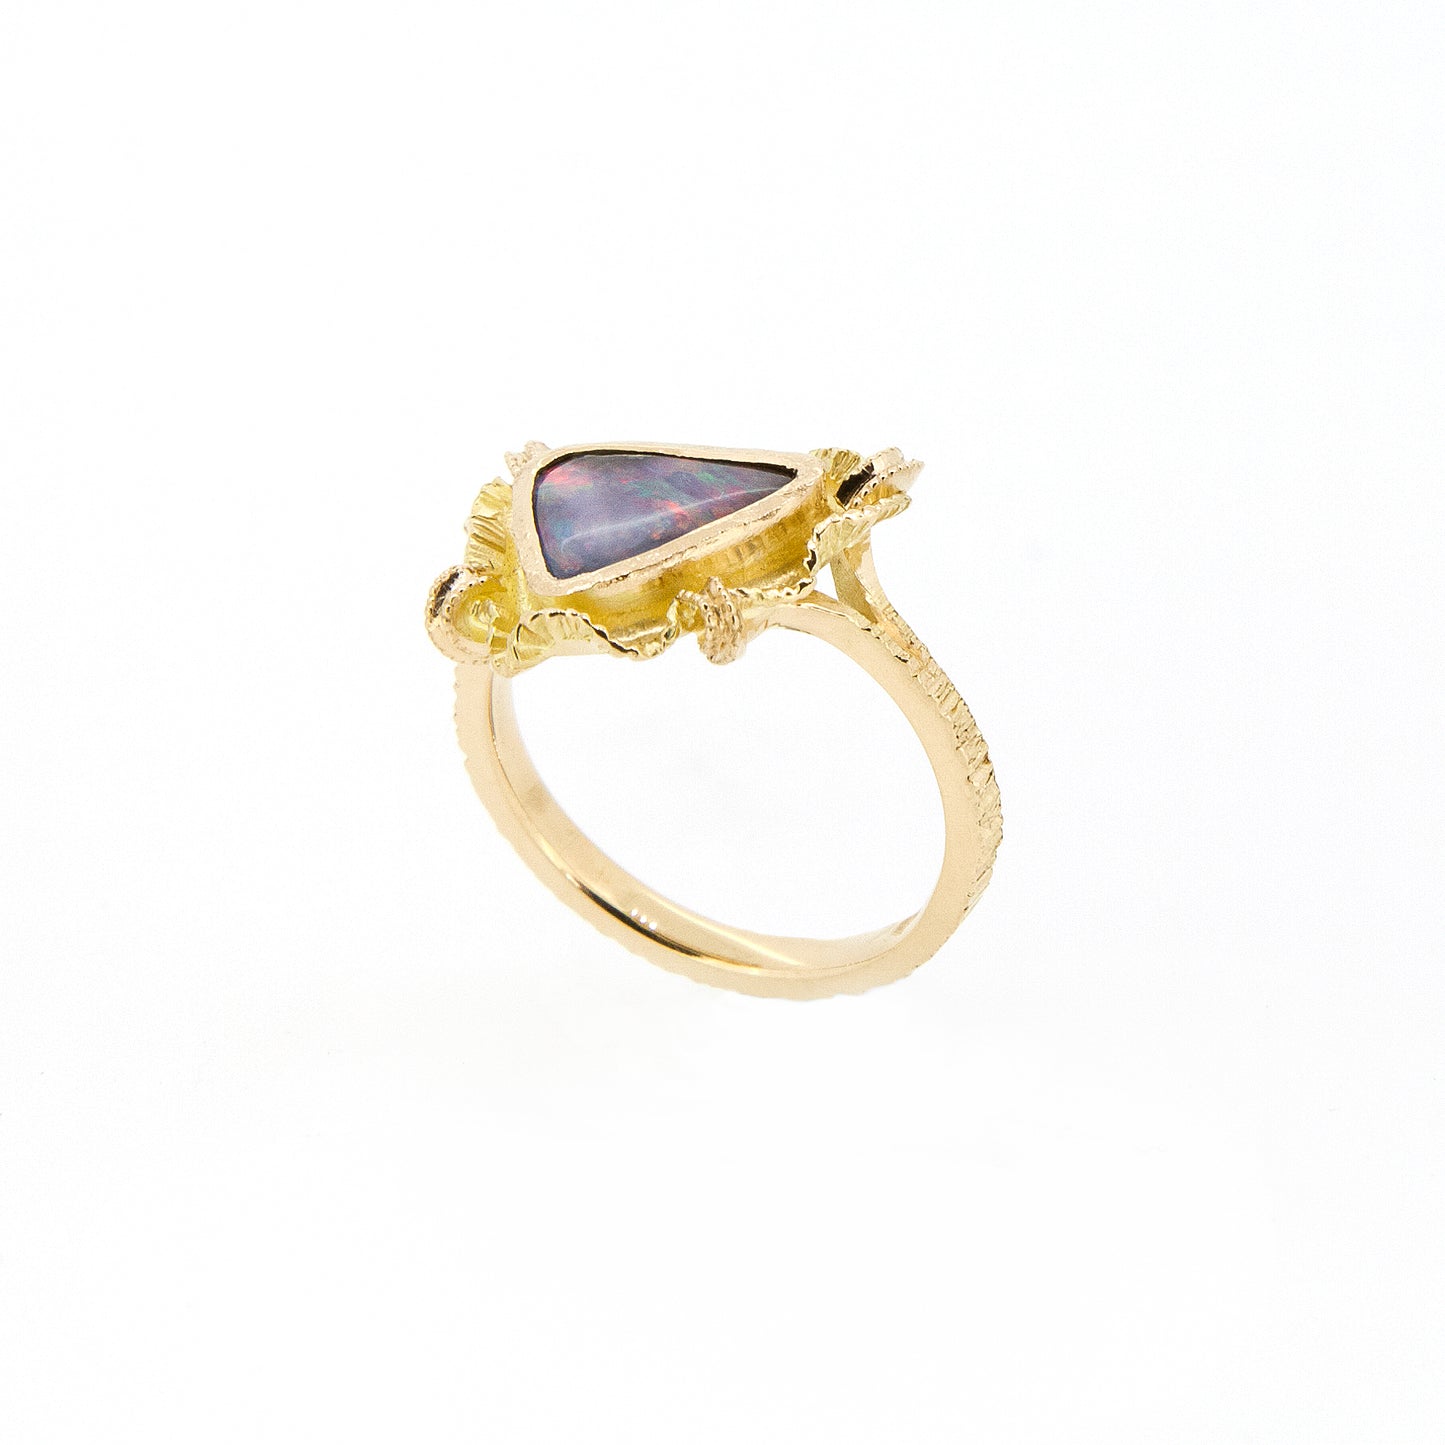 18ct yellow gold and purple Queensland Boulder opal. Australian made and hand selected opal for a unique style using ethically sourced materials. 